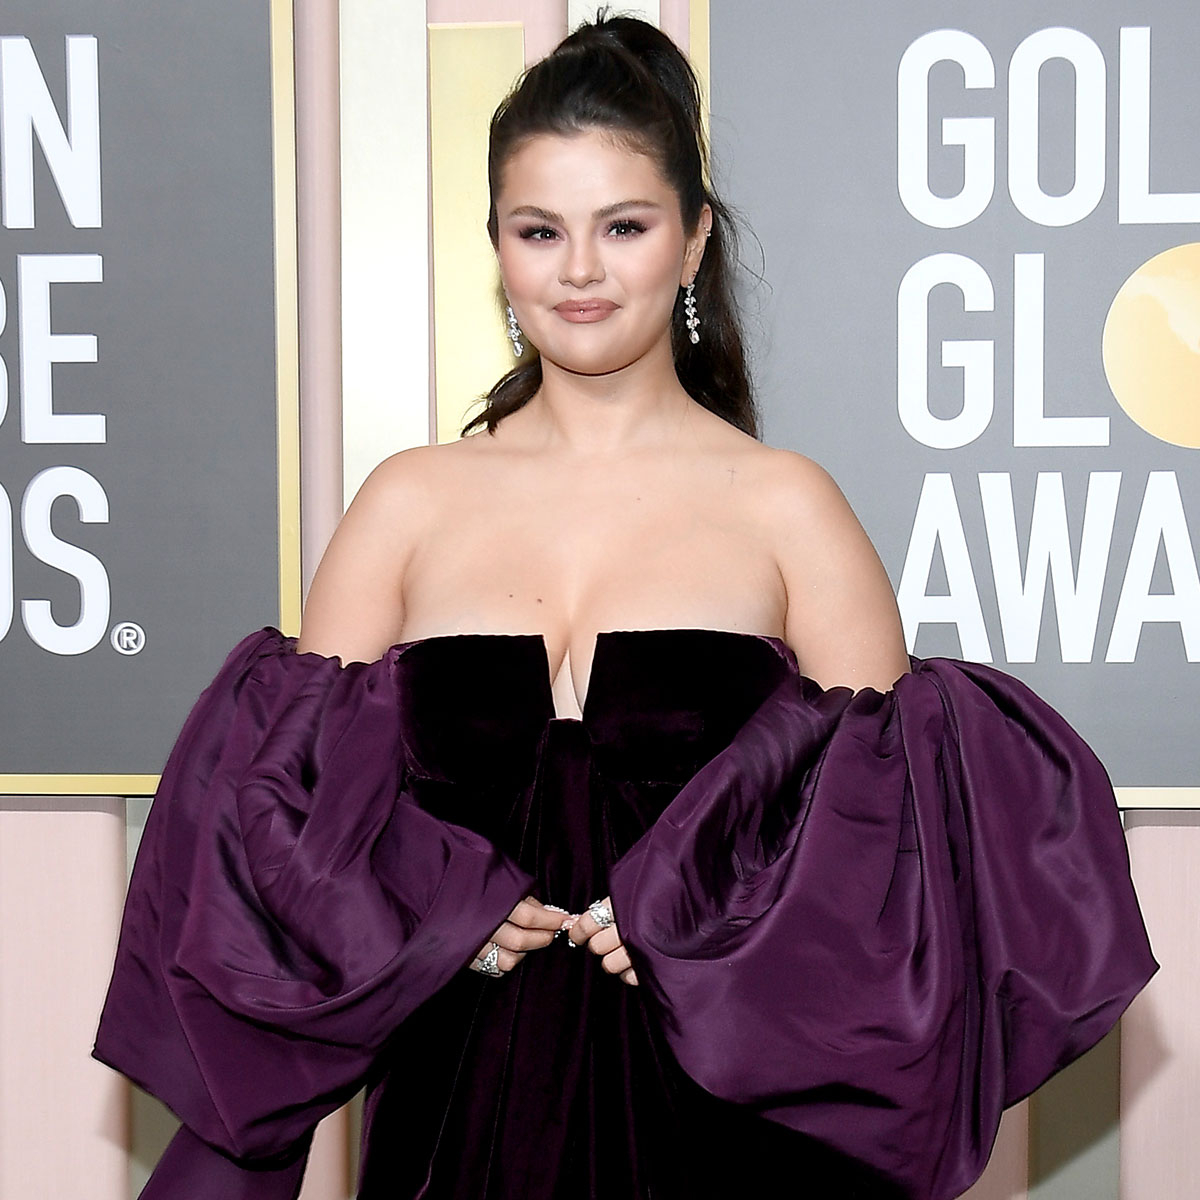 Selena Gomez Arrives at the Met Gala in an Angelic Coach Dress